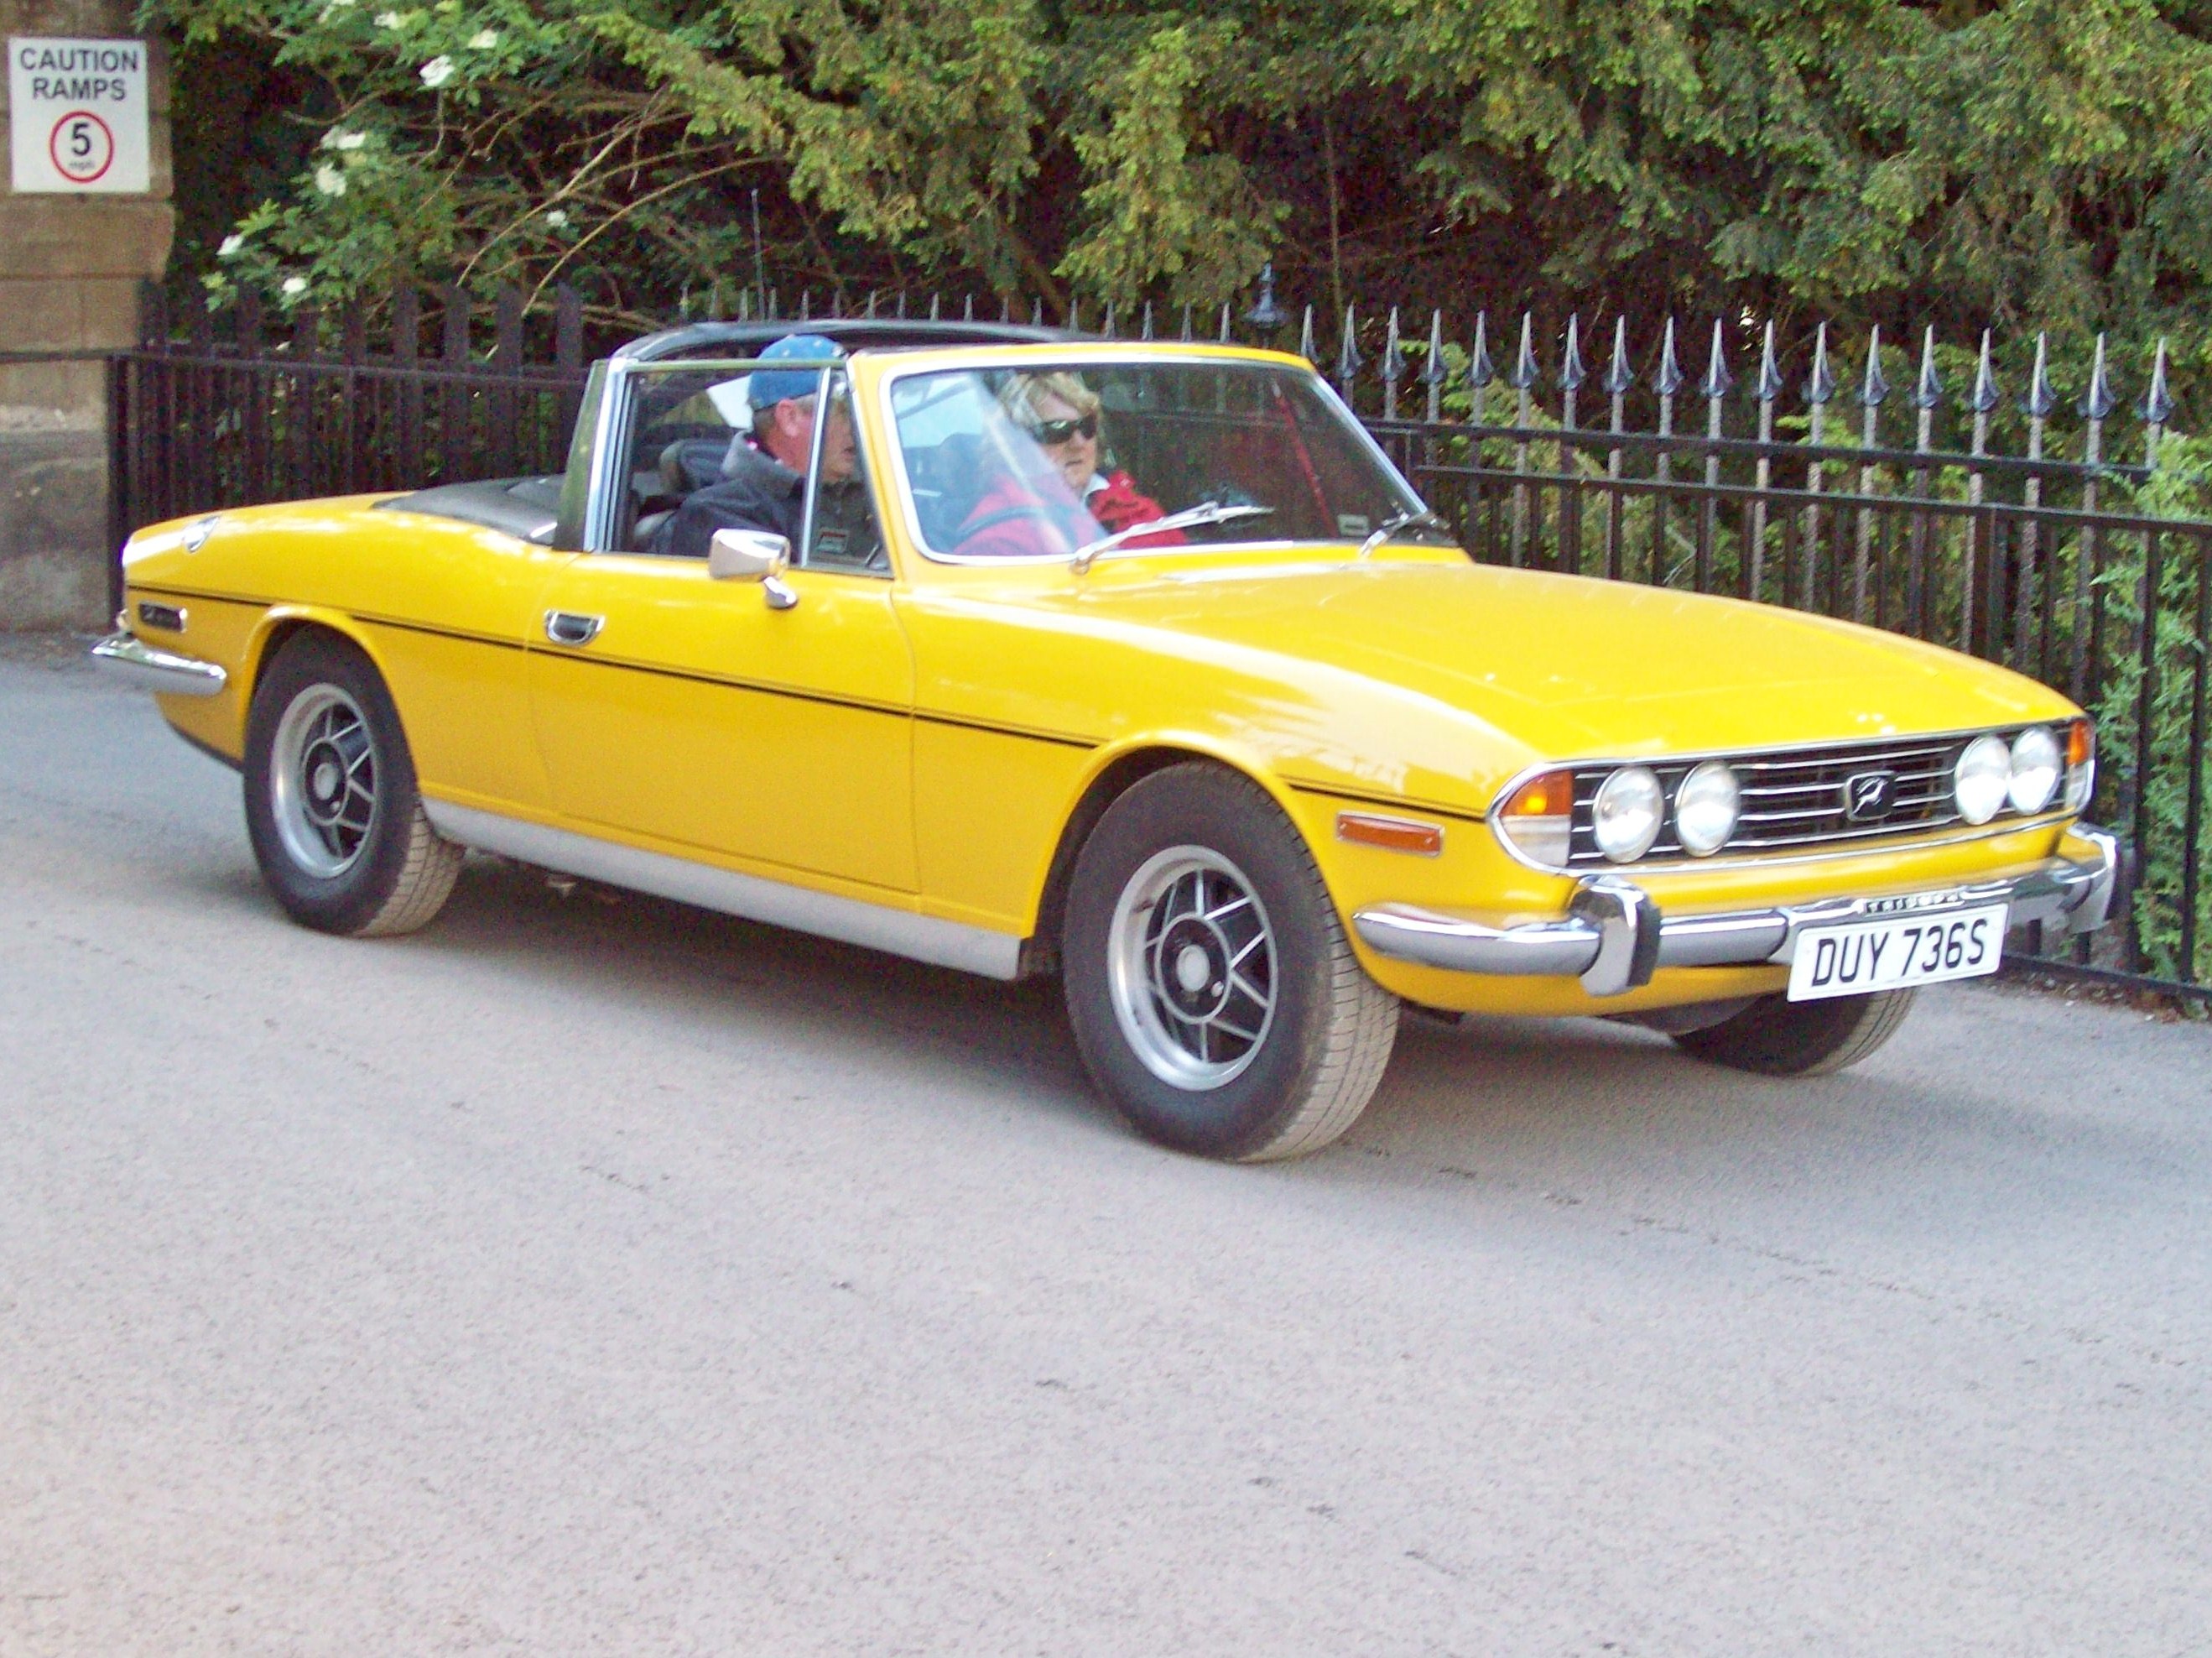 195 Triumph Stag Convertible. (1970-77) (2) | Flickr - Photo Sharing!